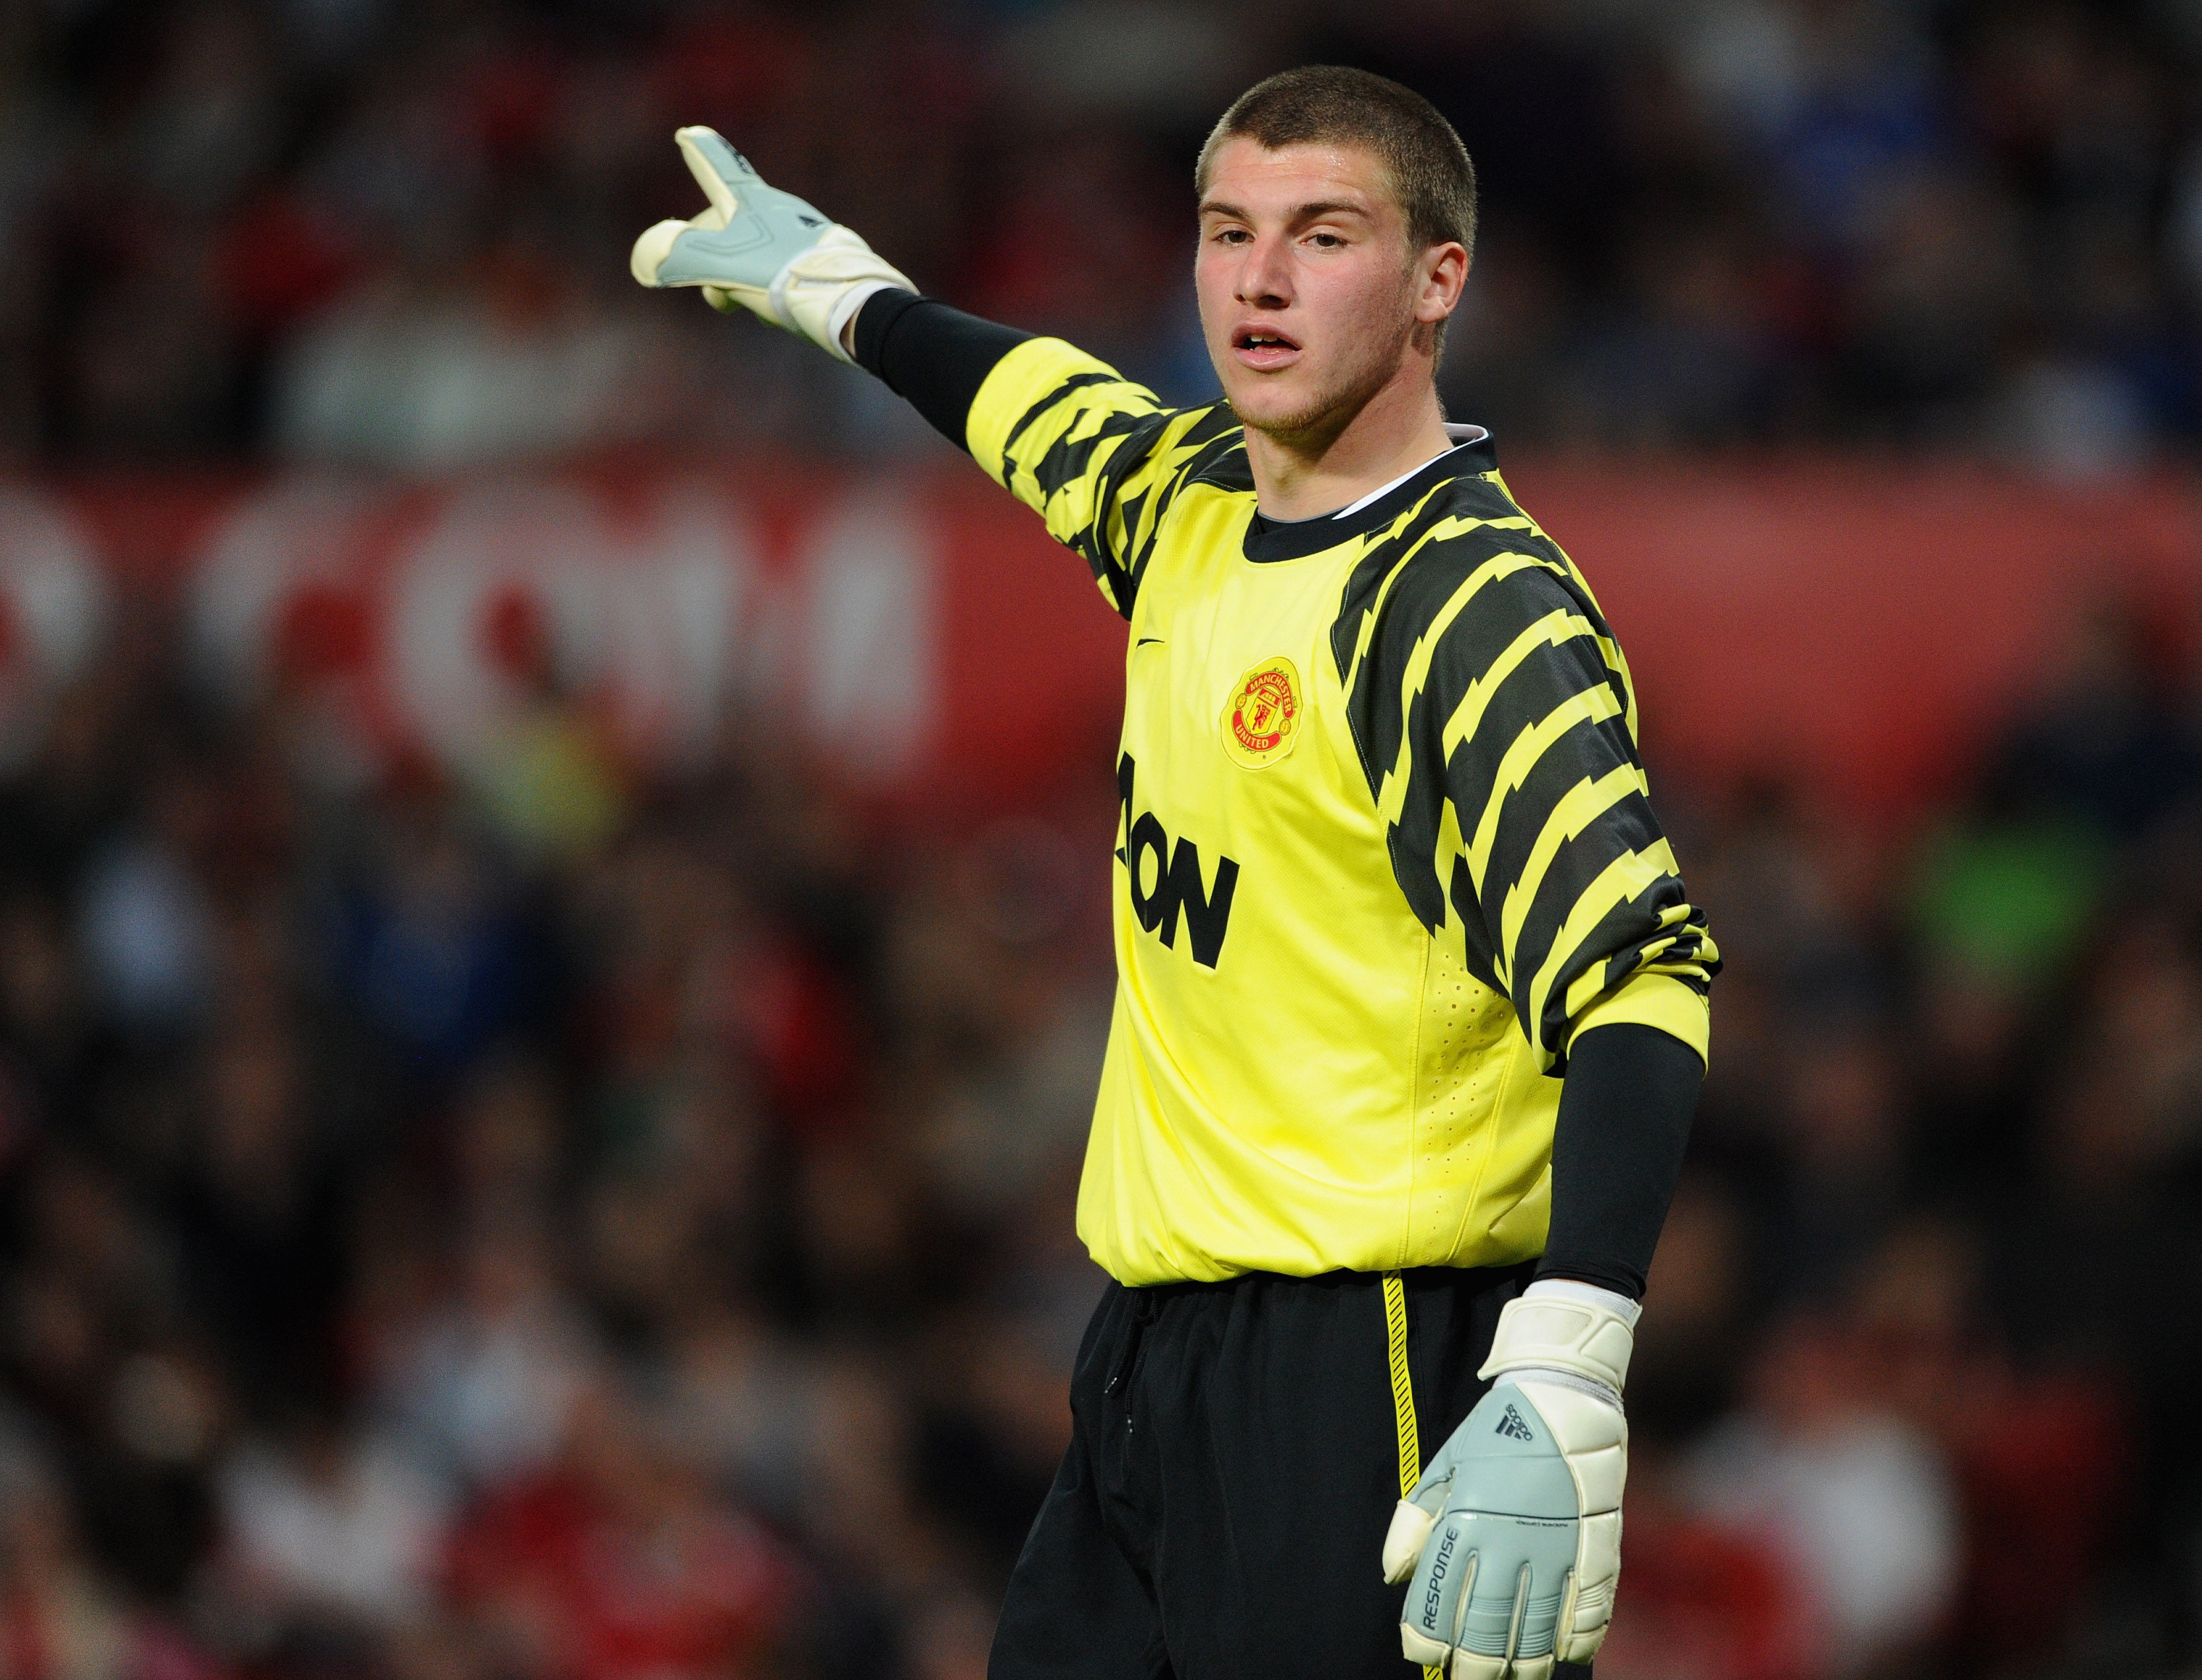 MANCHESTER, ENGLAND - APRIL 20: Sam Johnstone of Manchester United looks on during the FA Youth Cup Semi Final 2nd Leg between Manchester United and Chelsea at Old Trafford on April 20, 2011 in Manchester, England.  (Photo by Michael Regan/Getty Images)